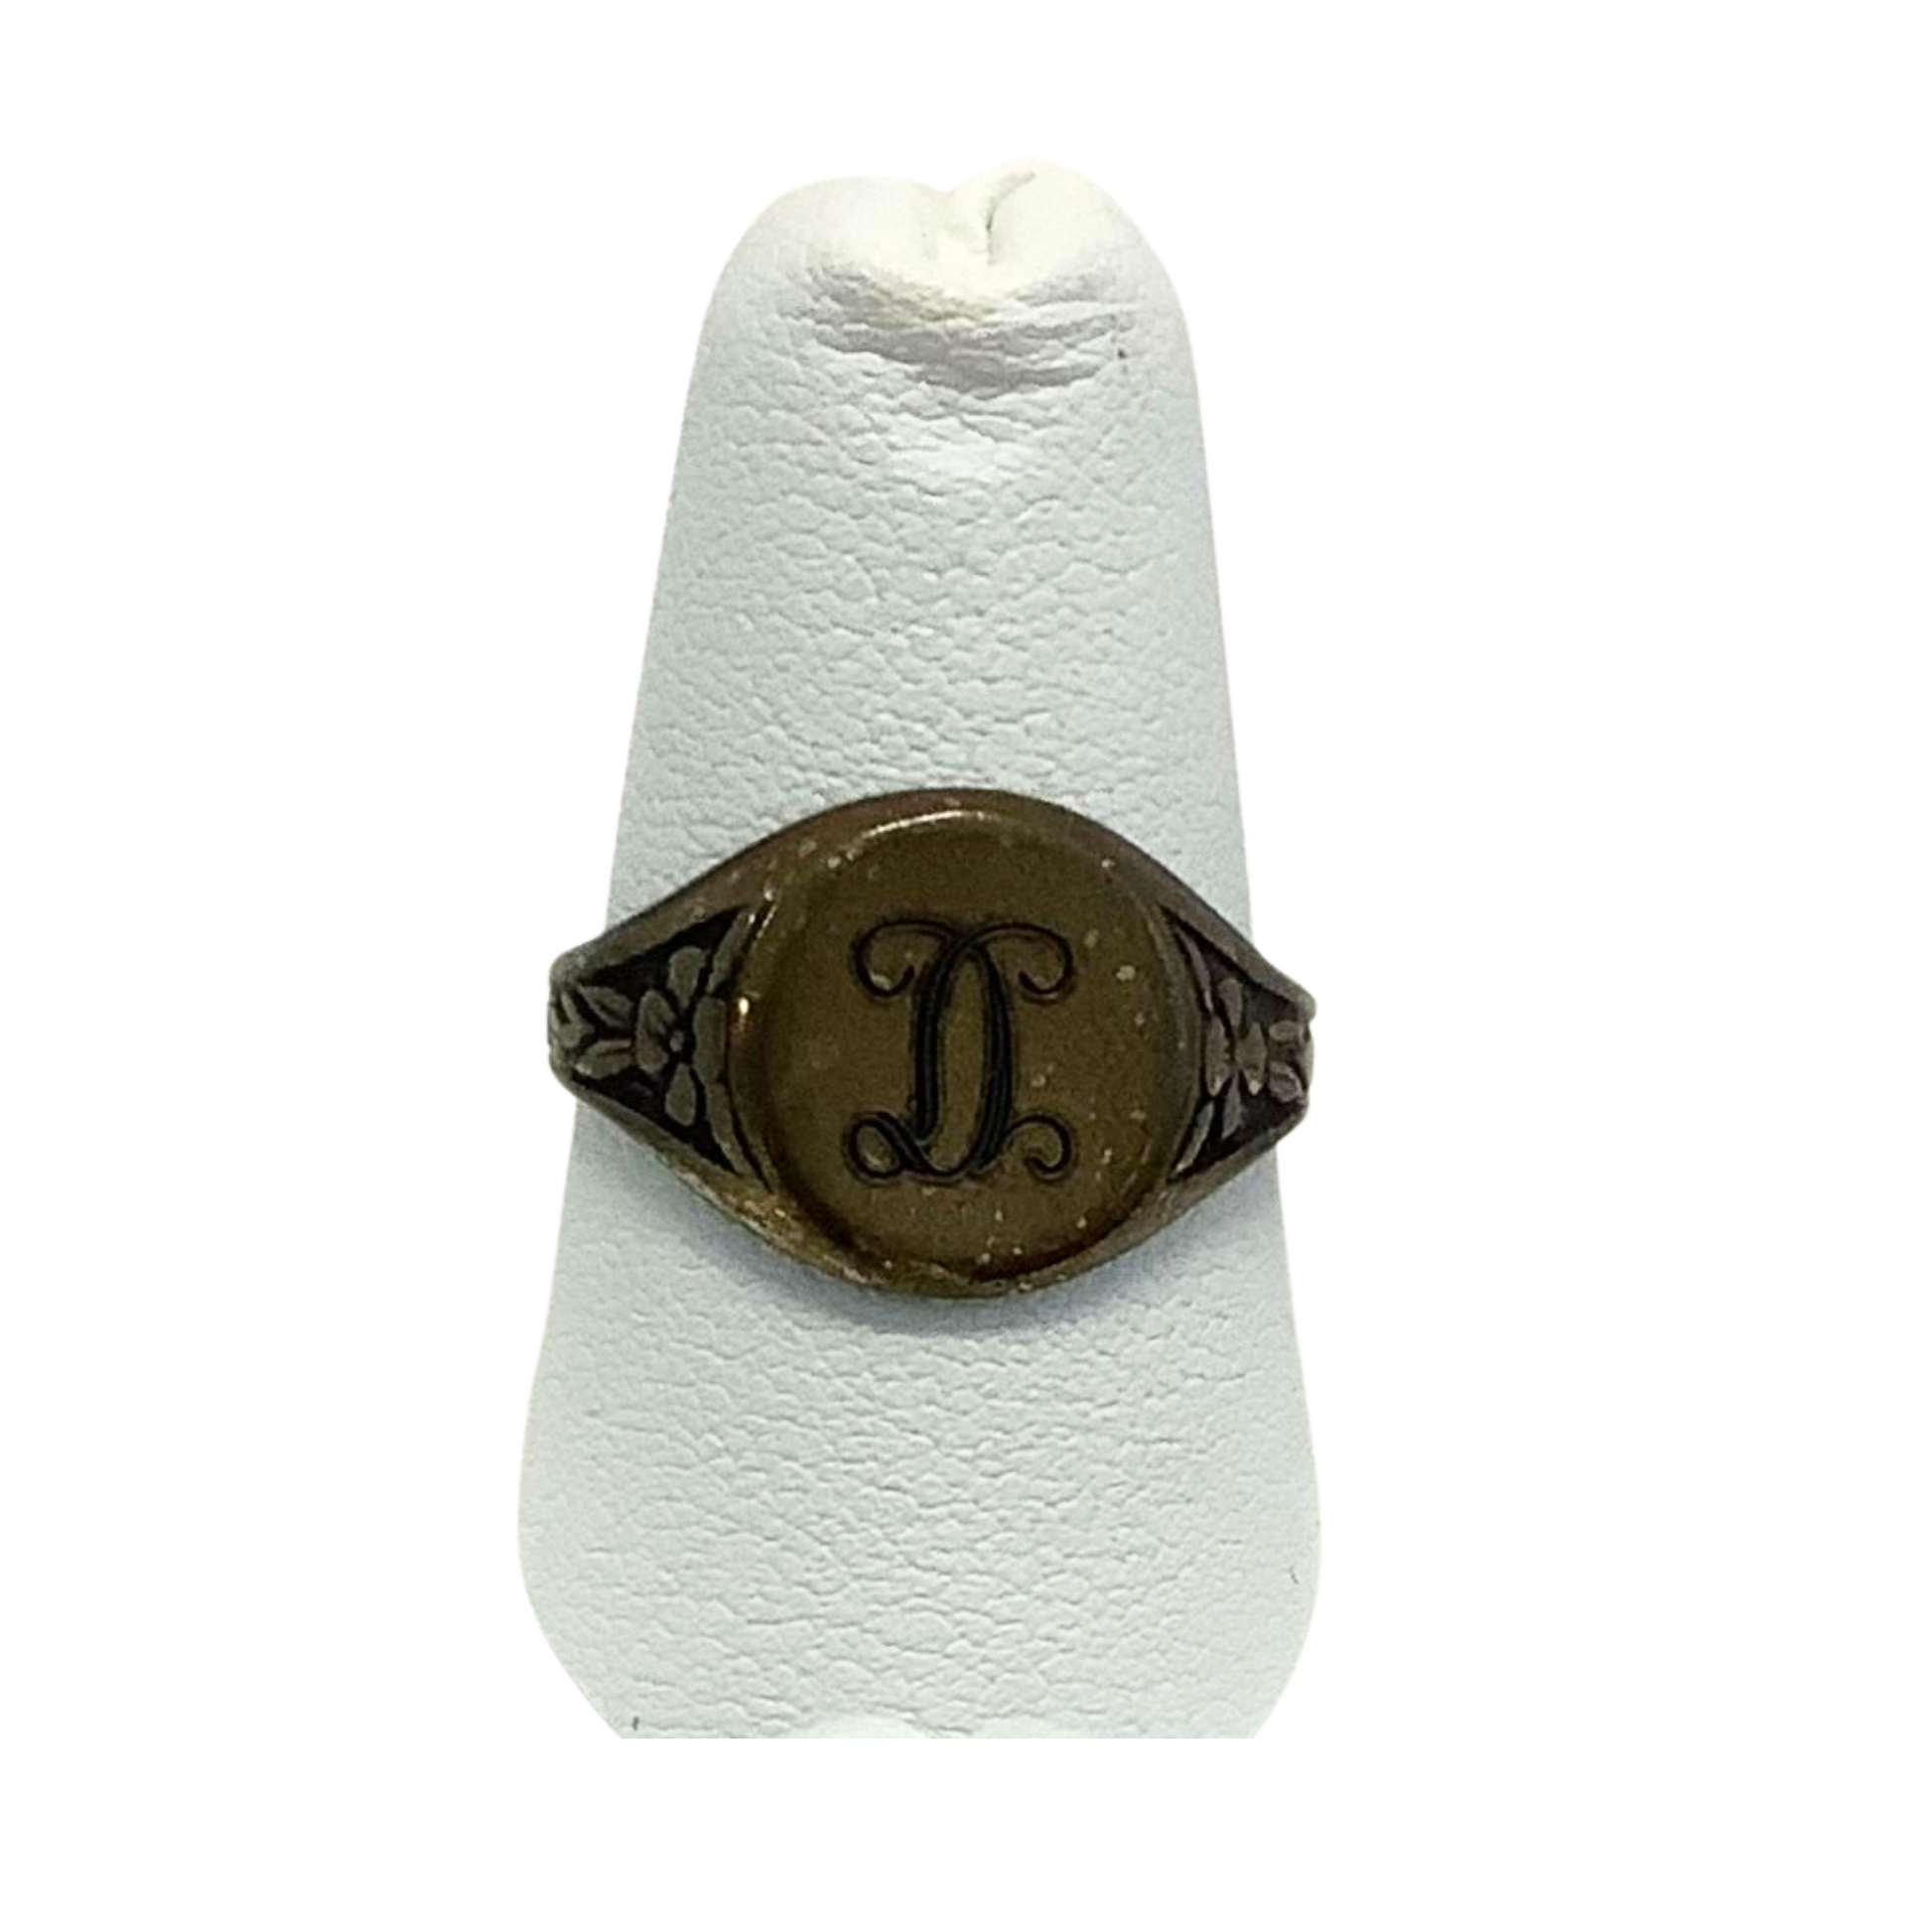 Our Initial Ring is the perfect way to express your unique style. Featuring bronze color and personalization, this ring is ideal for adding a classic, personalized touch to any look. Make it yours today!